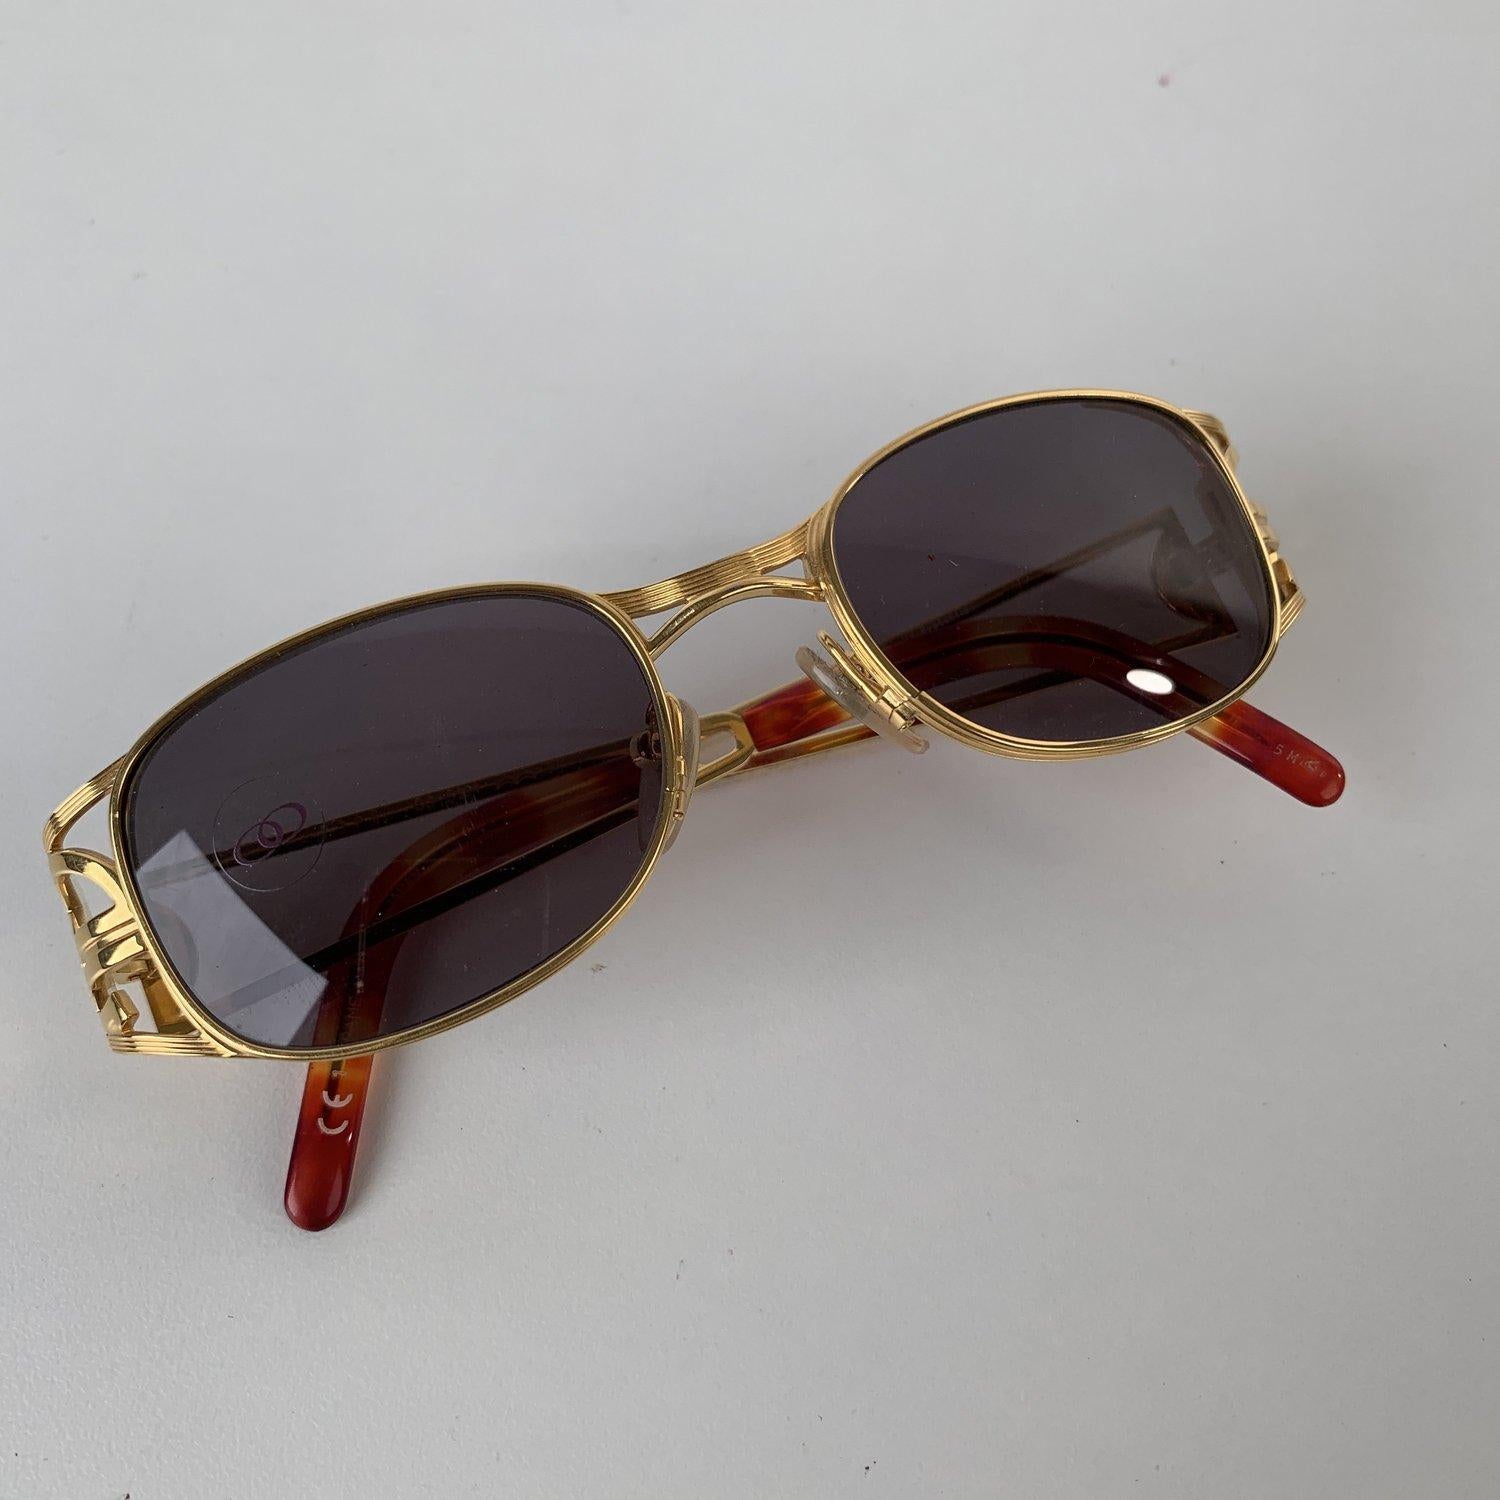 MATERIAL: Metal COLOR: Gold MODEL: 58-5101 GENDER: Adult Unisex SIZE: Medium Condition NOS (NEW OLD STOCK) - Never Worn or Used - They will come with a Generic Case Measurements TEMPLE MAX. LENGTH: 135 mm EYE / LENS MAX. WIDTH: 50 mm EYE / LENS MAX.